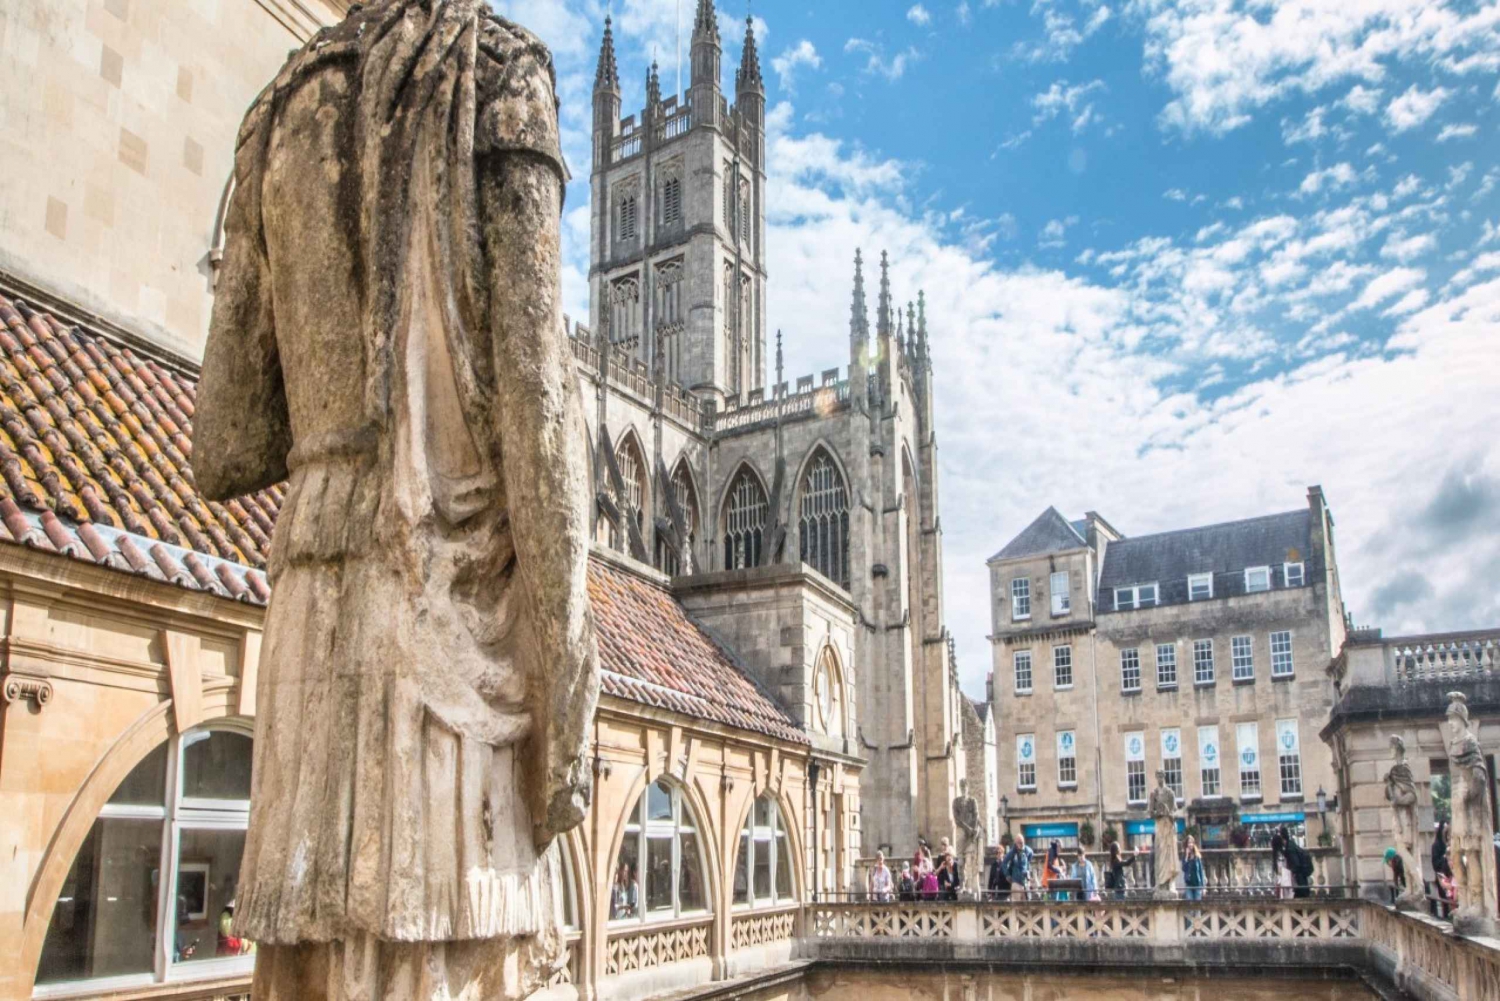 From London: Stonehenge, Bath and Windsor Private Car Tour